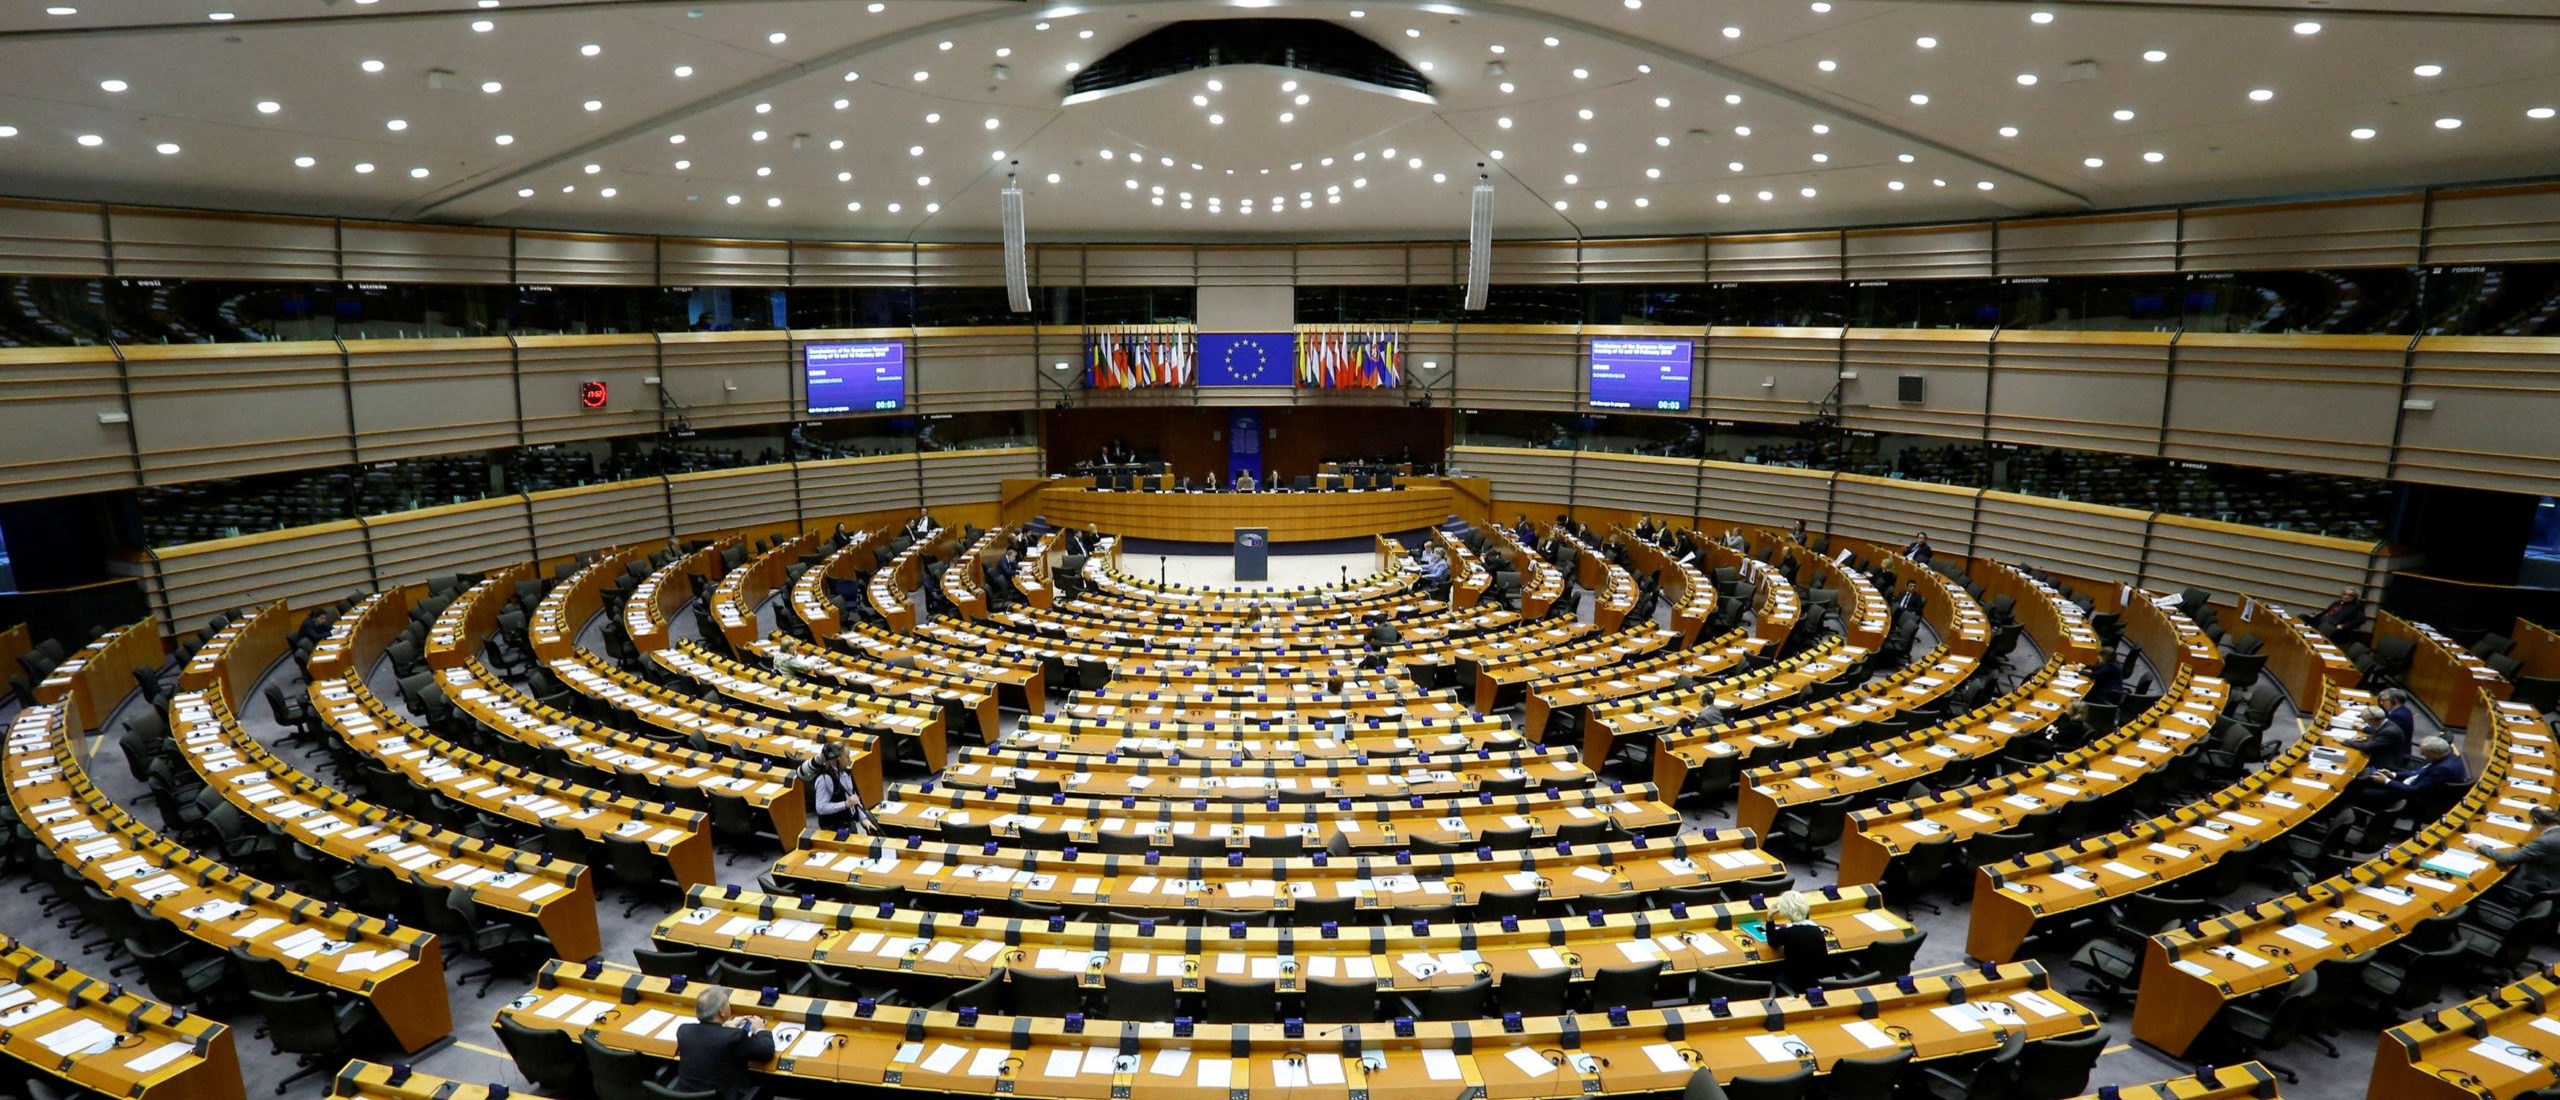 FILE PHOTO: A general view of the hemicycle at the European Parliament in Brussels, Belgium, February 24, 2016. REUTERS/Yves Herman/File Photo